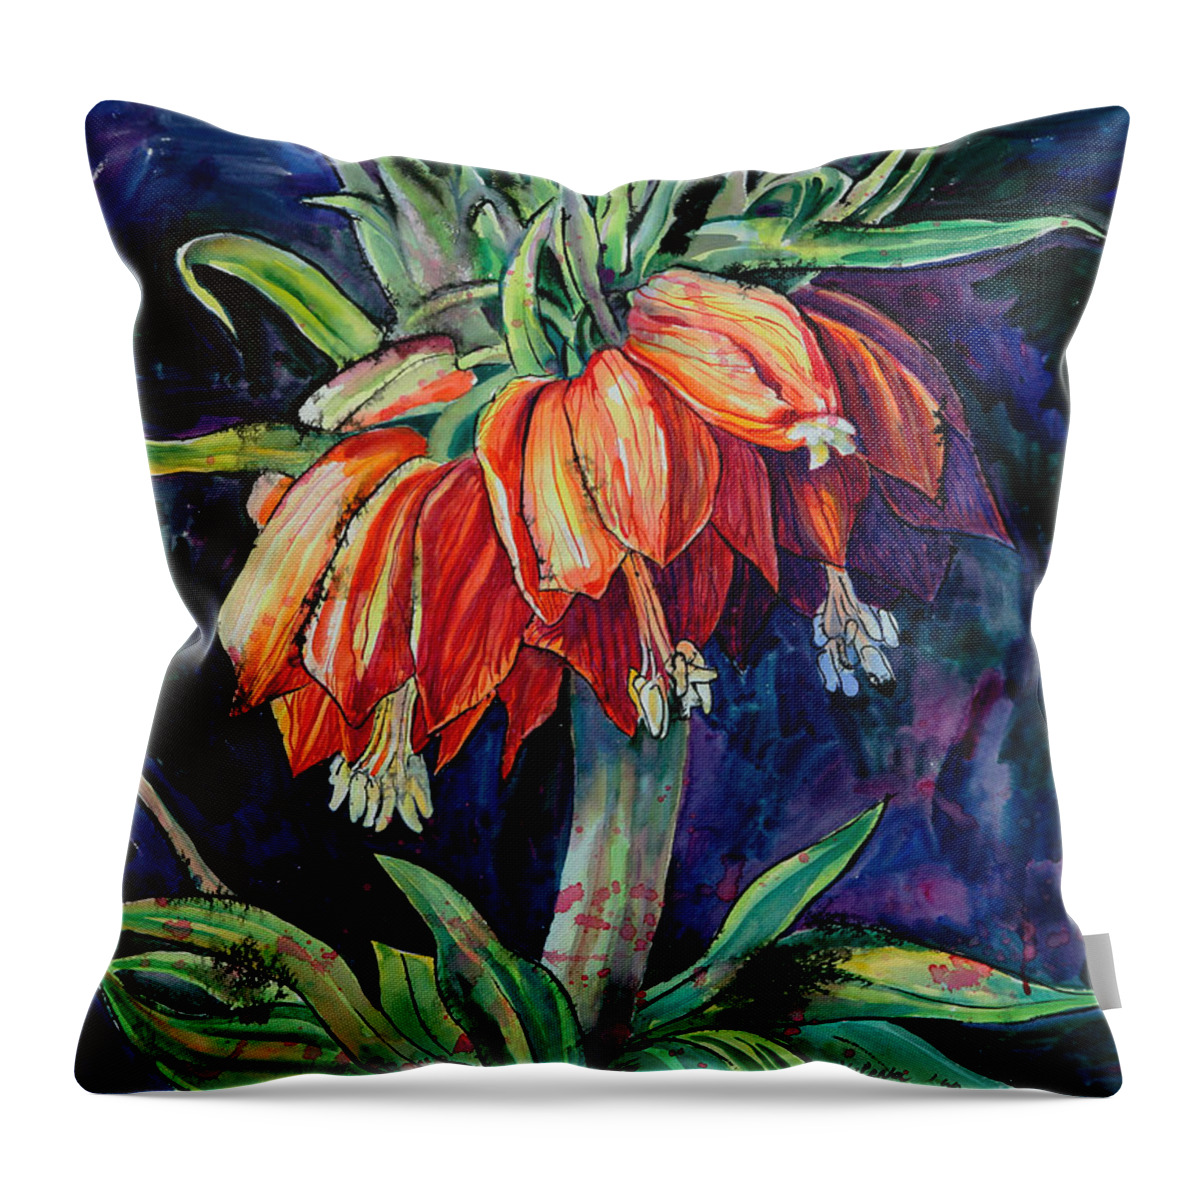 Flower Throw Pillow featuring the painting Night Flower by Yelena Tylkina